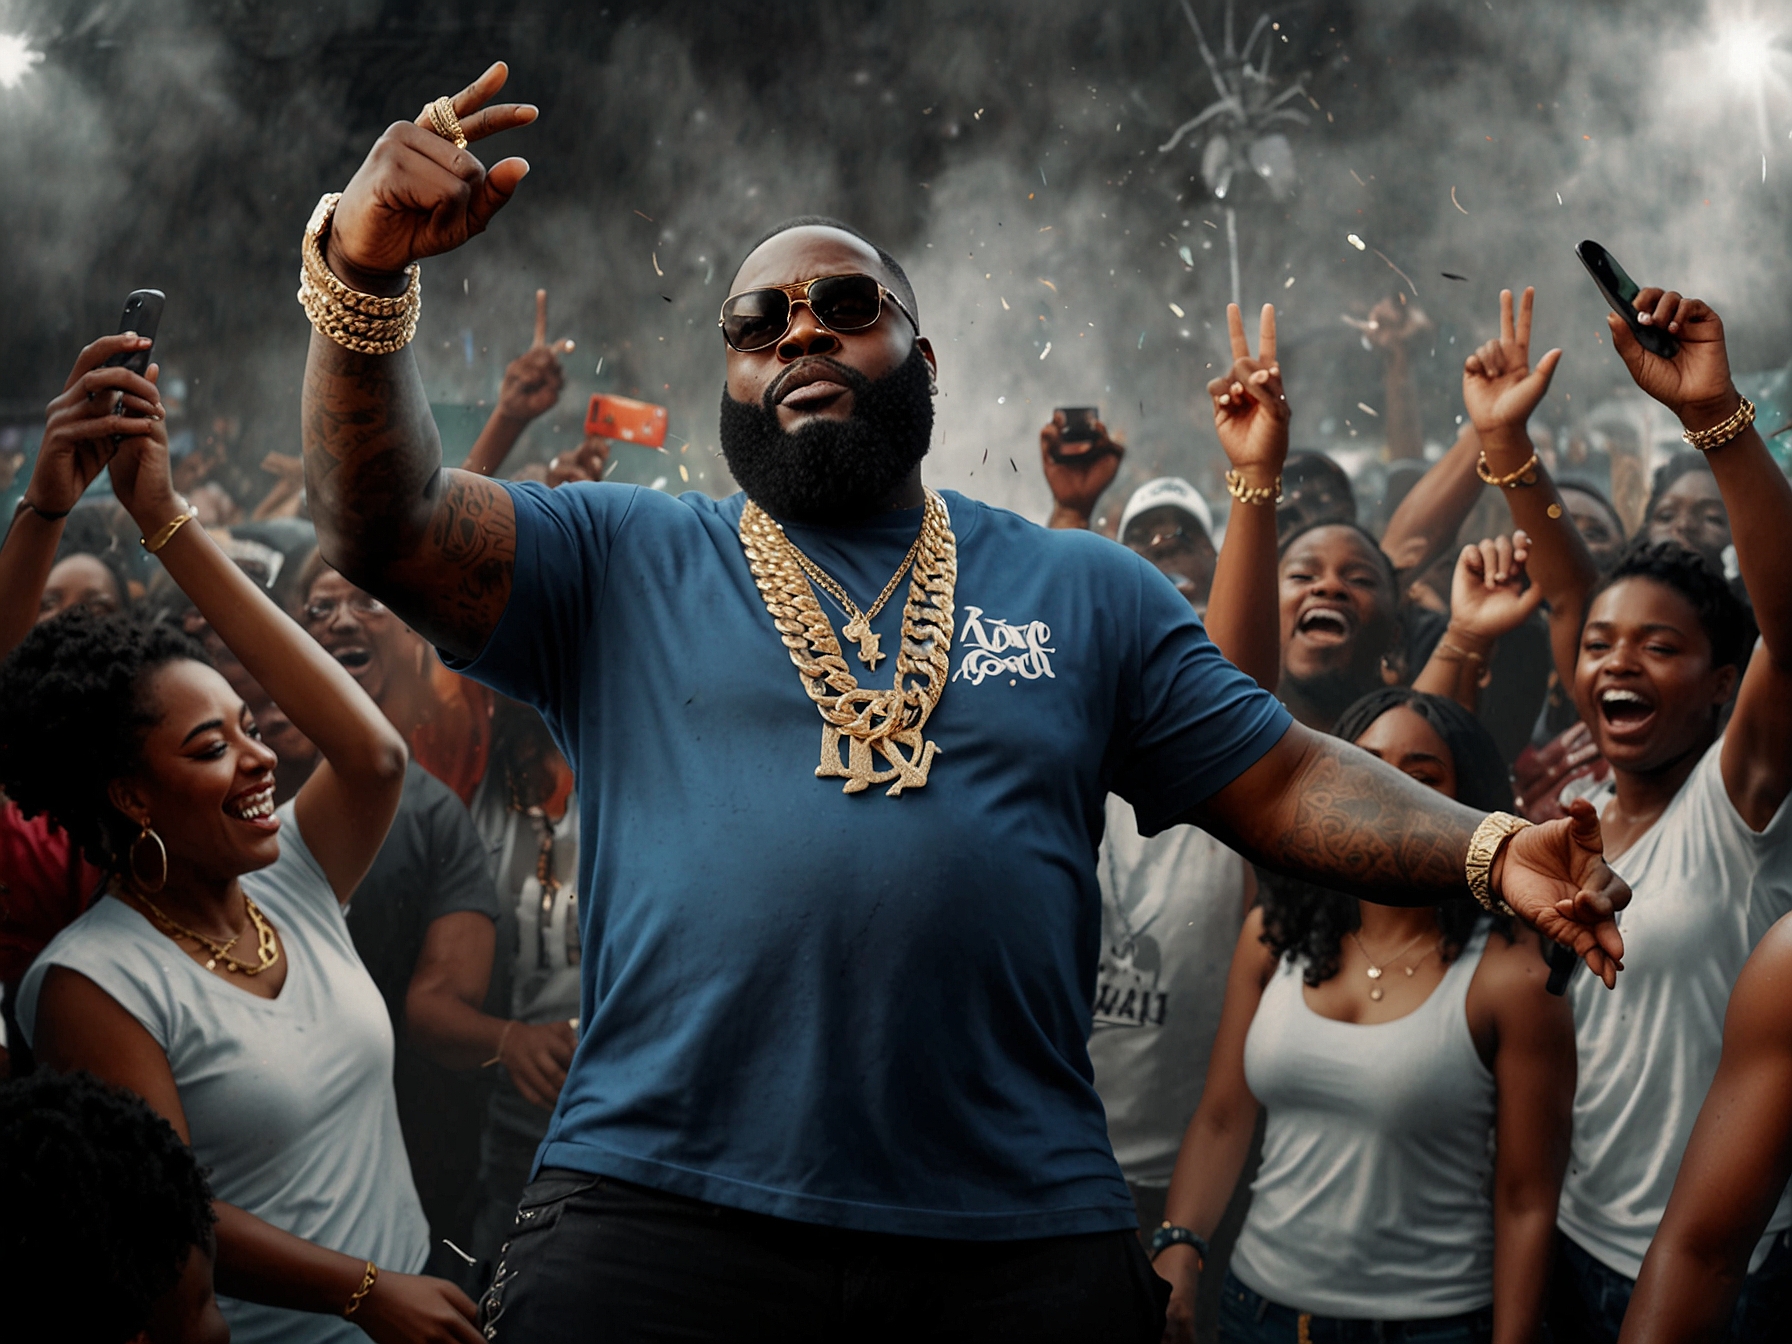 Rick Ross commands the stage at Blavity House Fest with an explosive performance, complete with pyrotechnics and a thundering bass, captivating the audience with his hits.